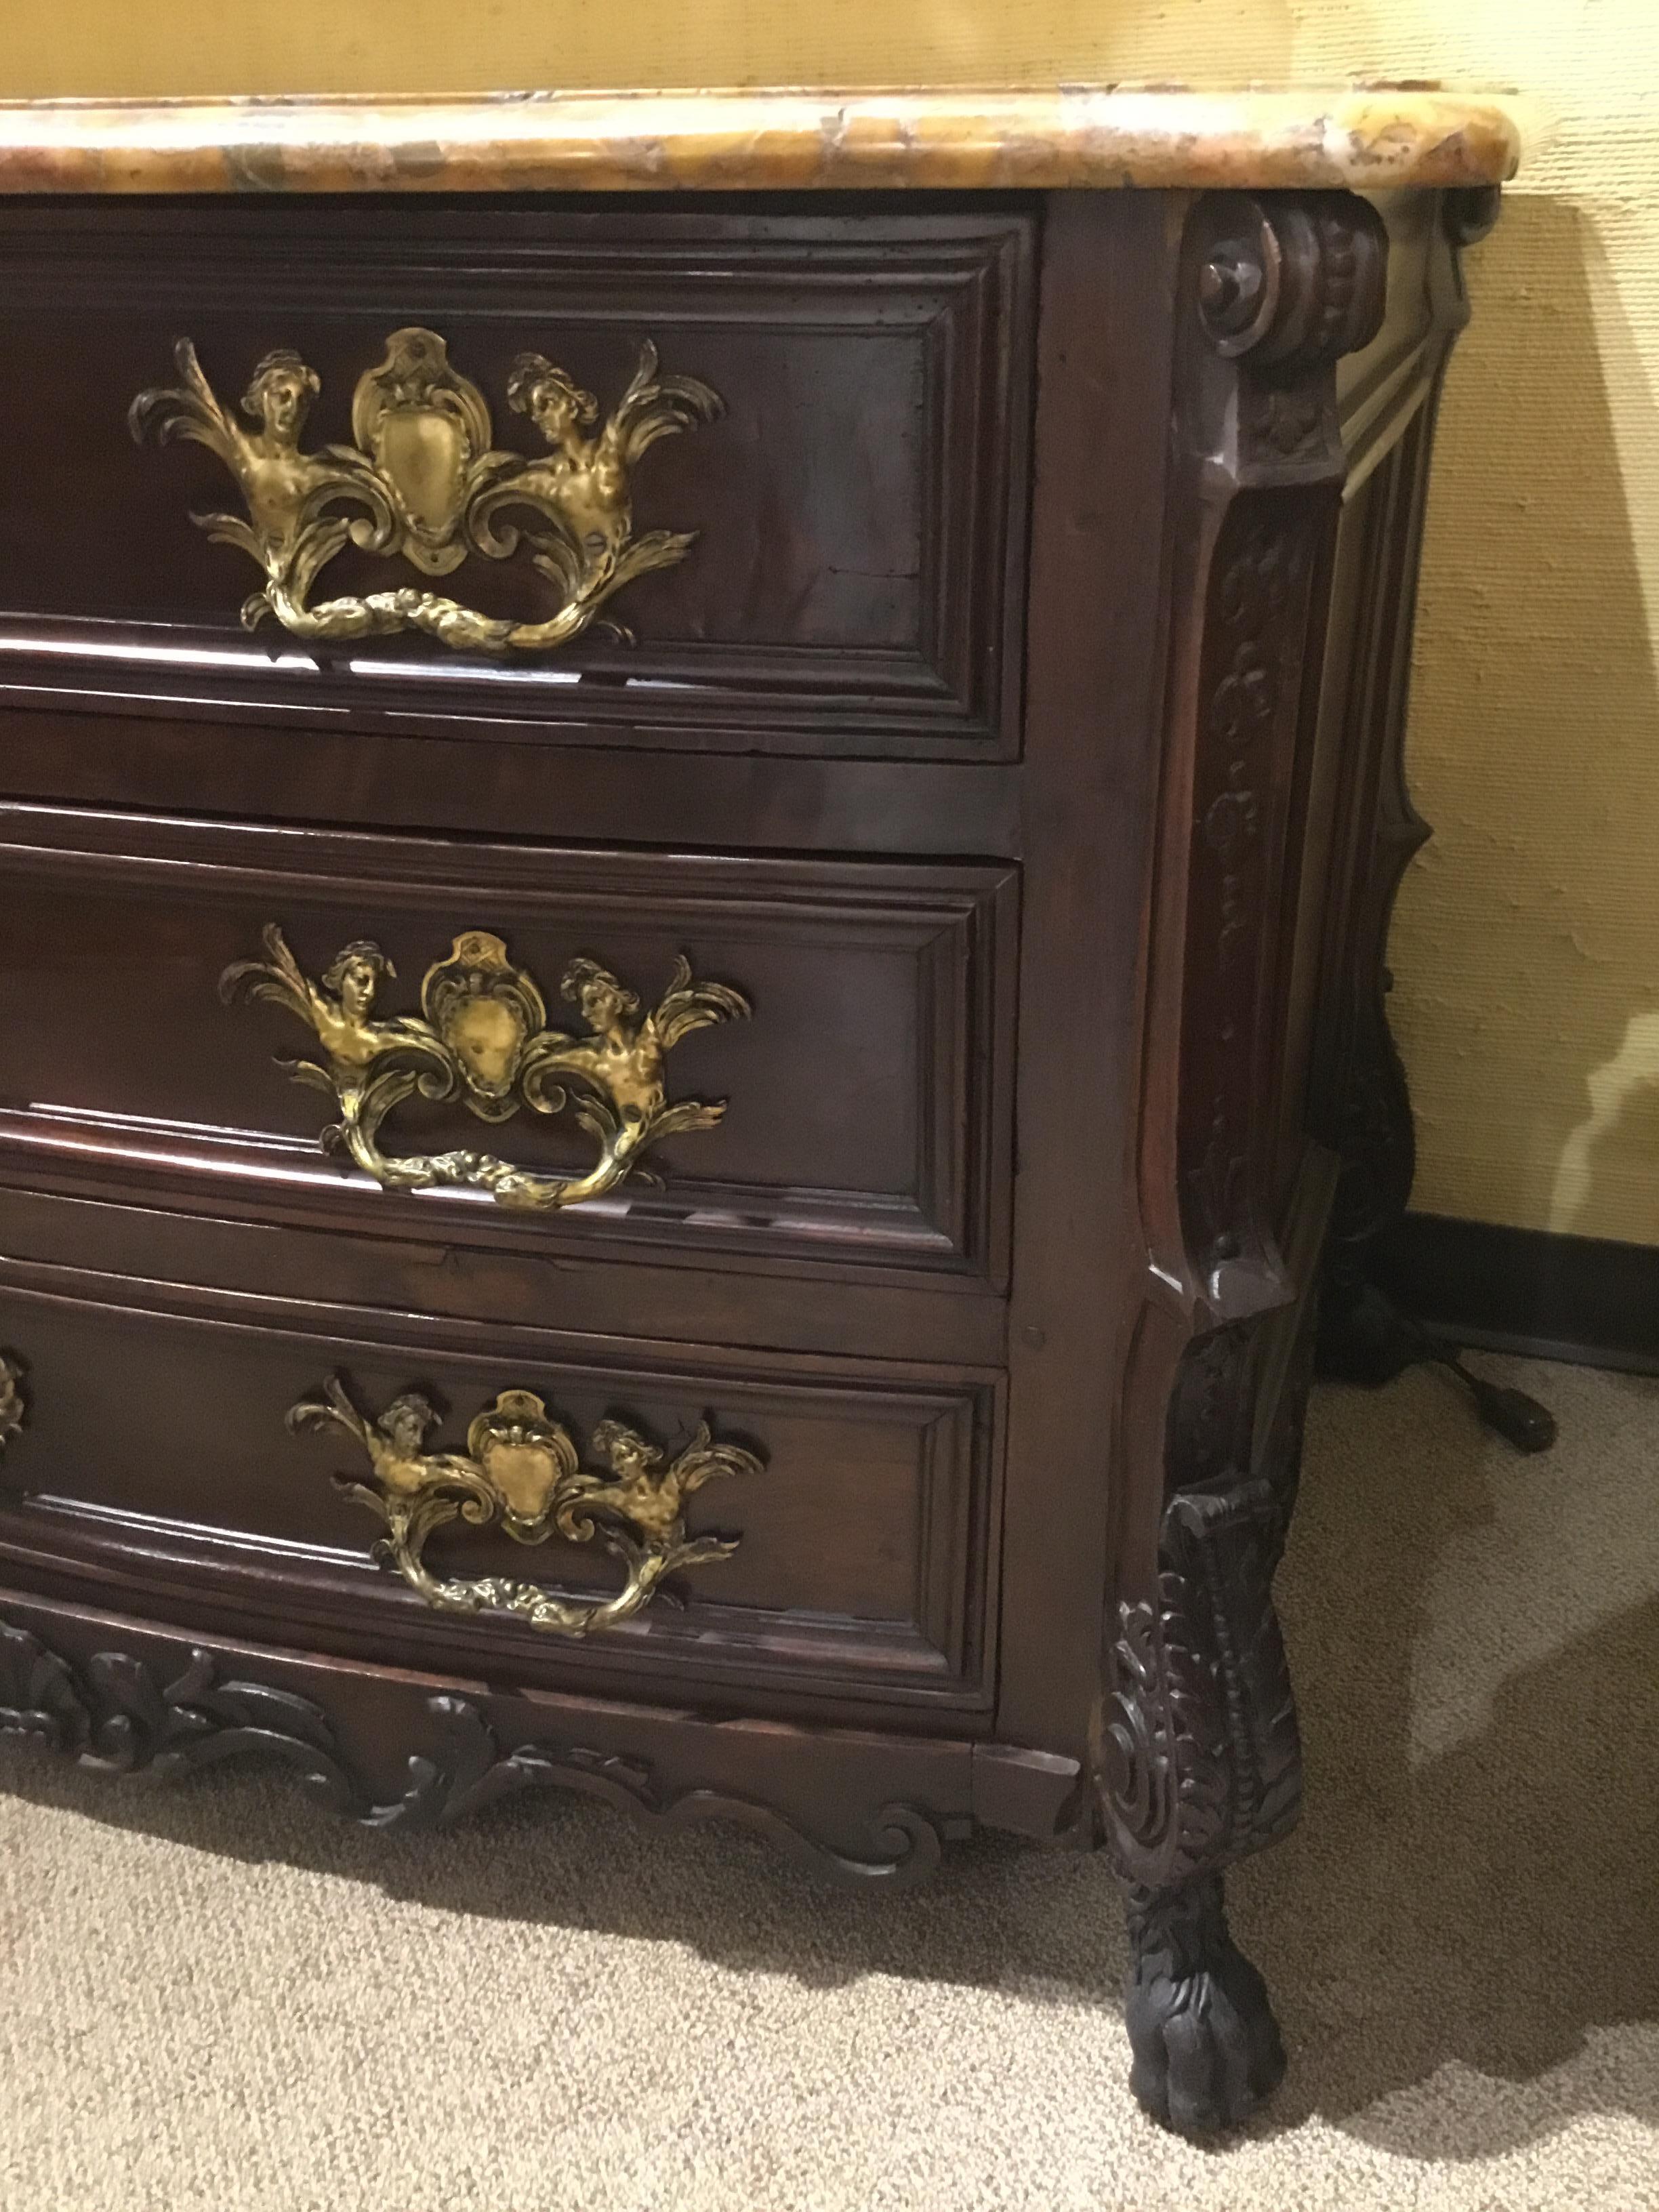 Unique and handsome rosewood chest of drawers with a marble top in shades of gold and amber.
Carving down each side of this piece ends in carved paw. Paneled sides are very deep. This
Is a sturdy and very well made piece. It dates to the 1860s and